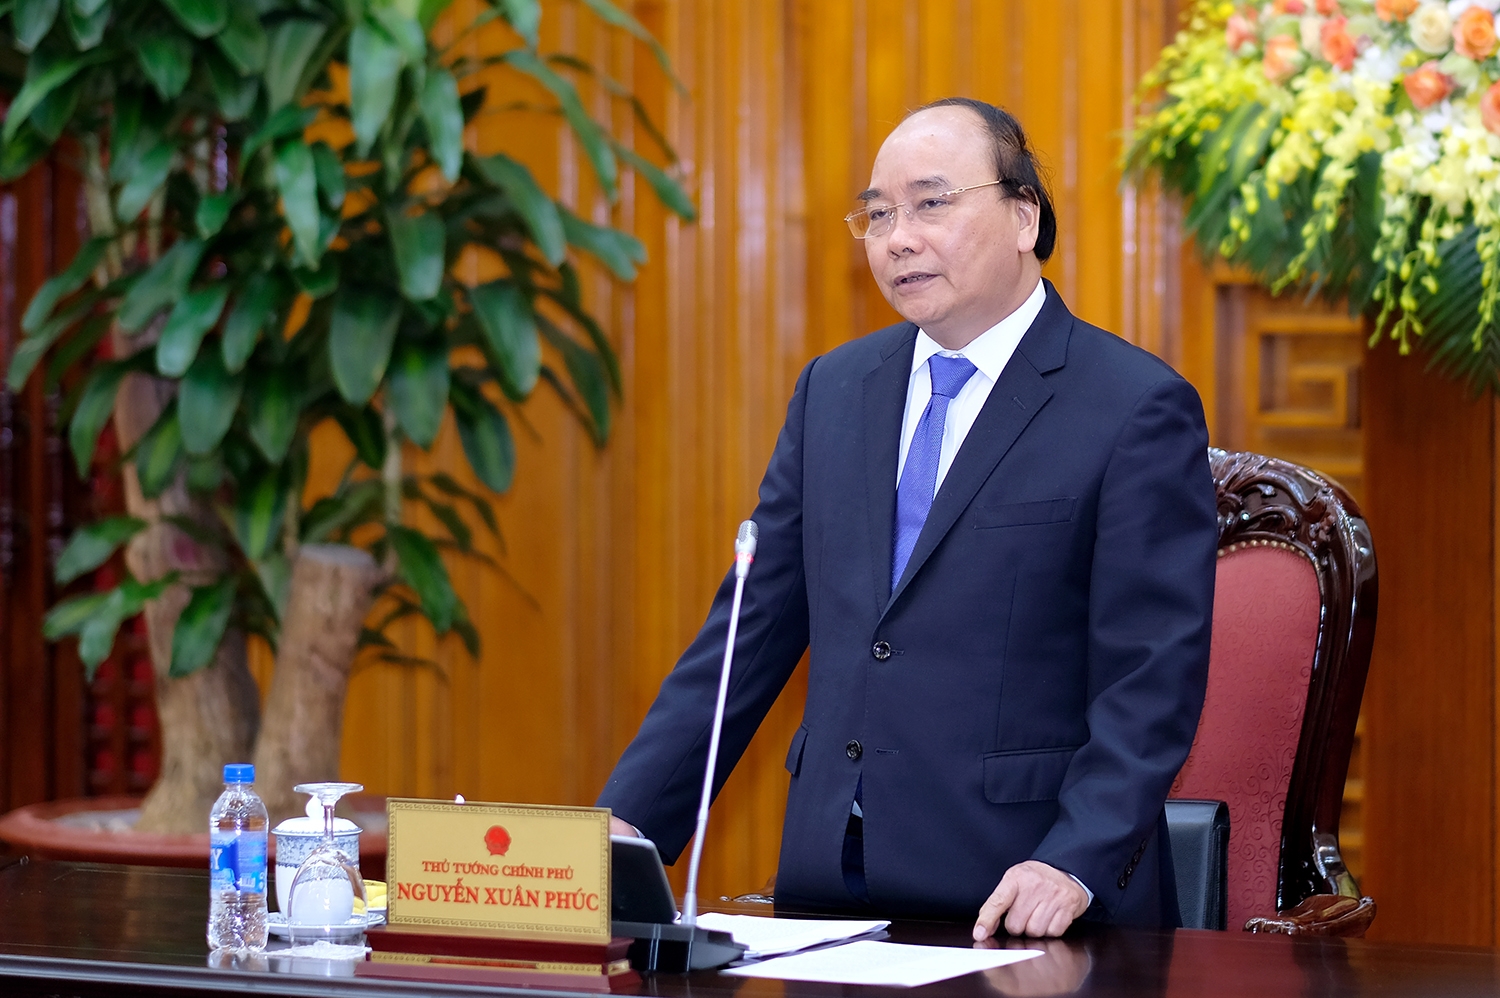 Vietnam PM asks for effective solutions for economic recovery in coming years